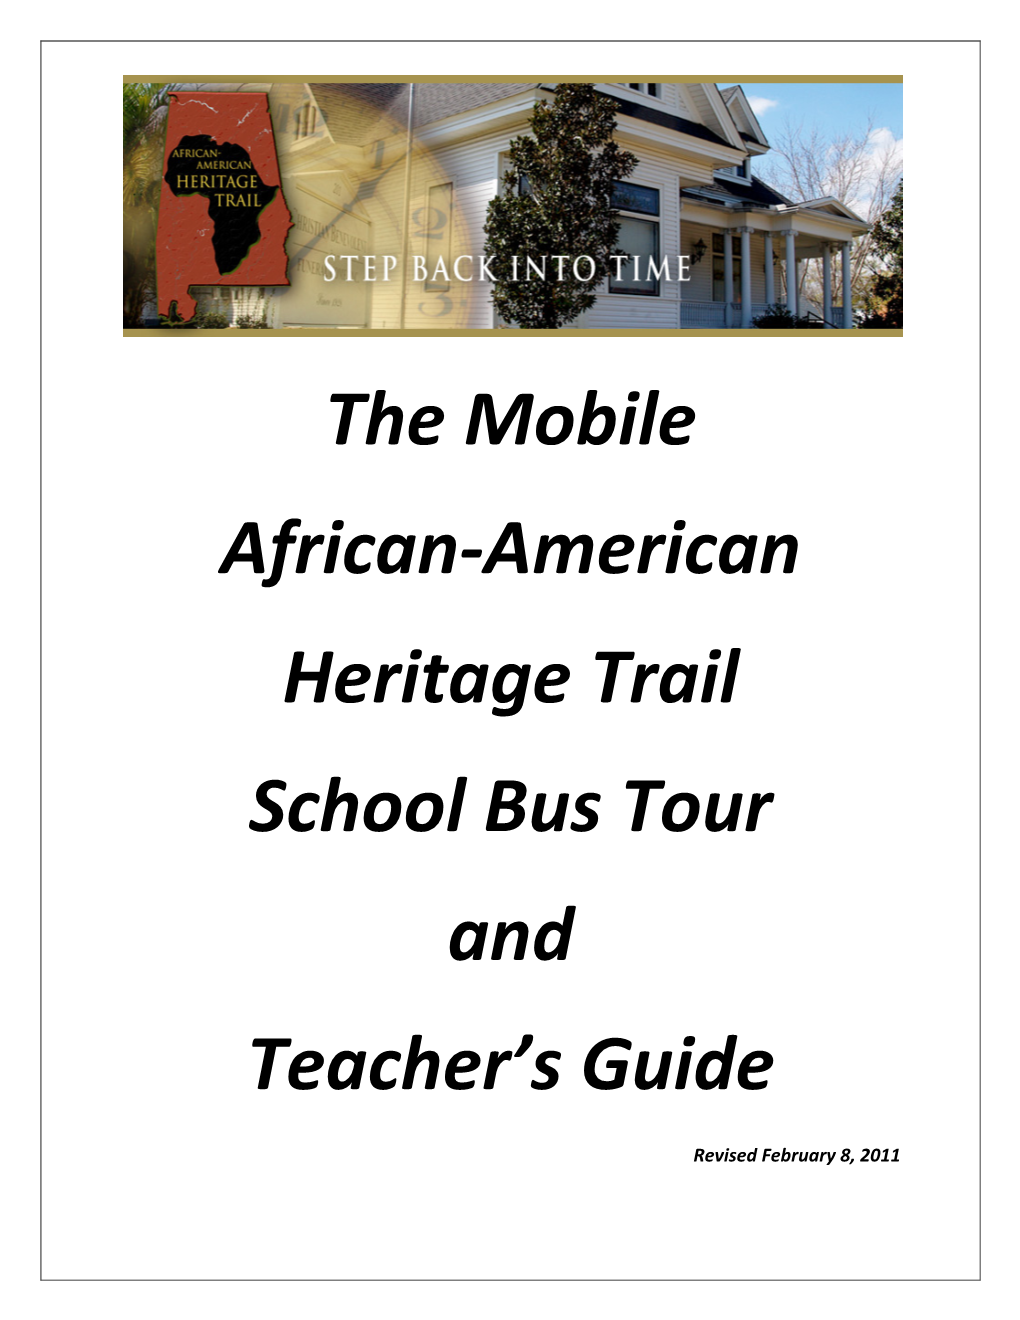 The Mobile African-American Heritage Trail School Bus Tour and Teacher’S Guide